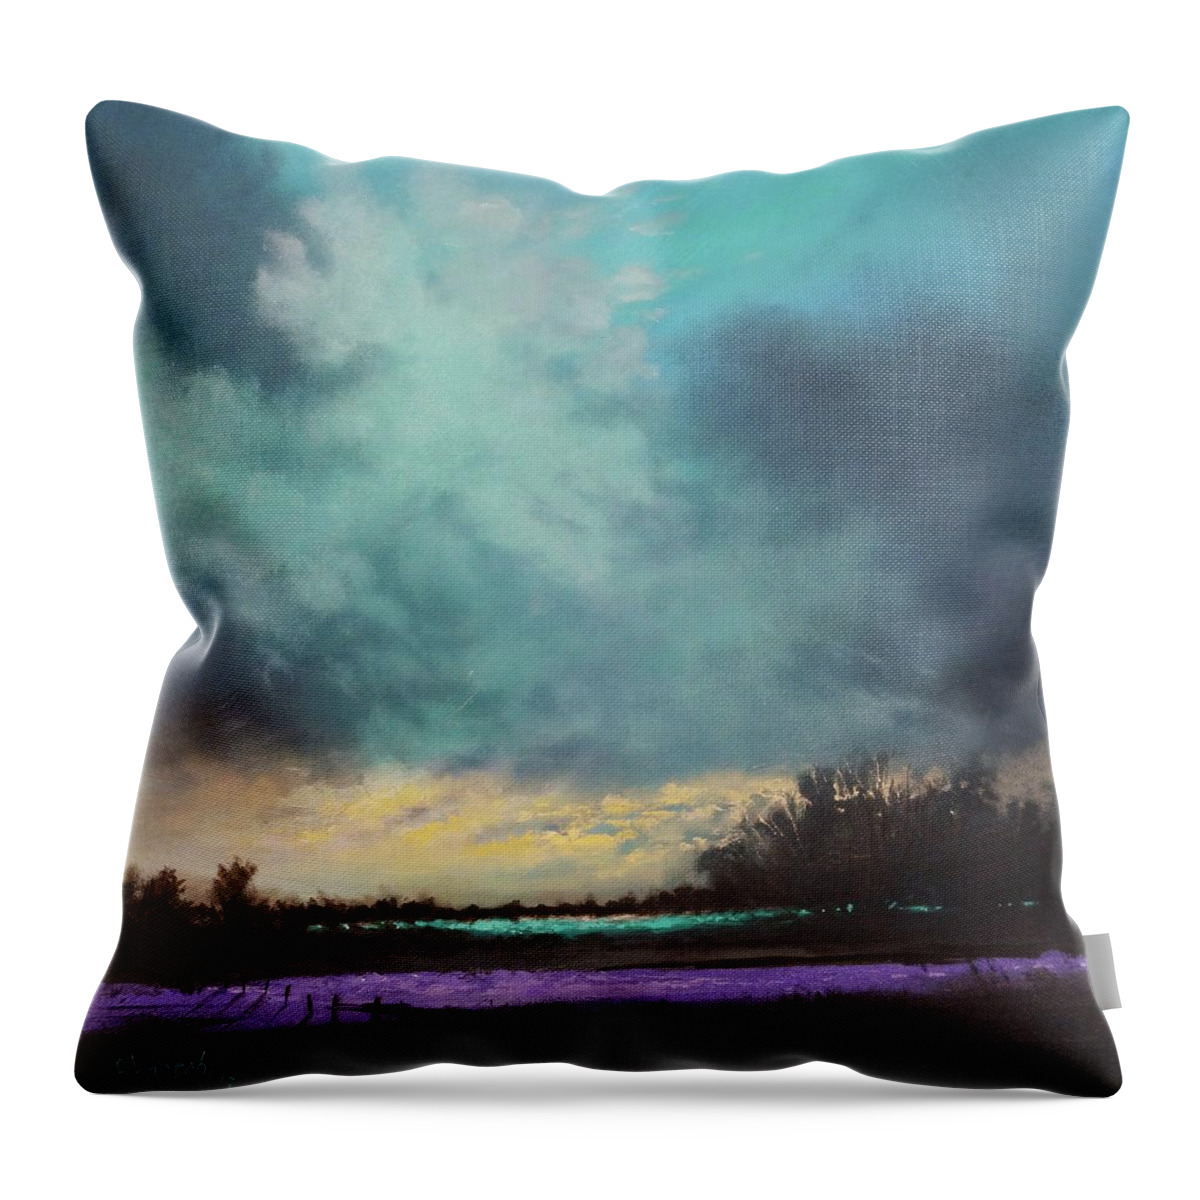 Blue And Lavender; Contemporary Landscape; Tom Shropshire Painting Throw Pillow featuring the painting Lavender Fields by Tom Shropshire